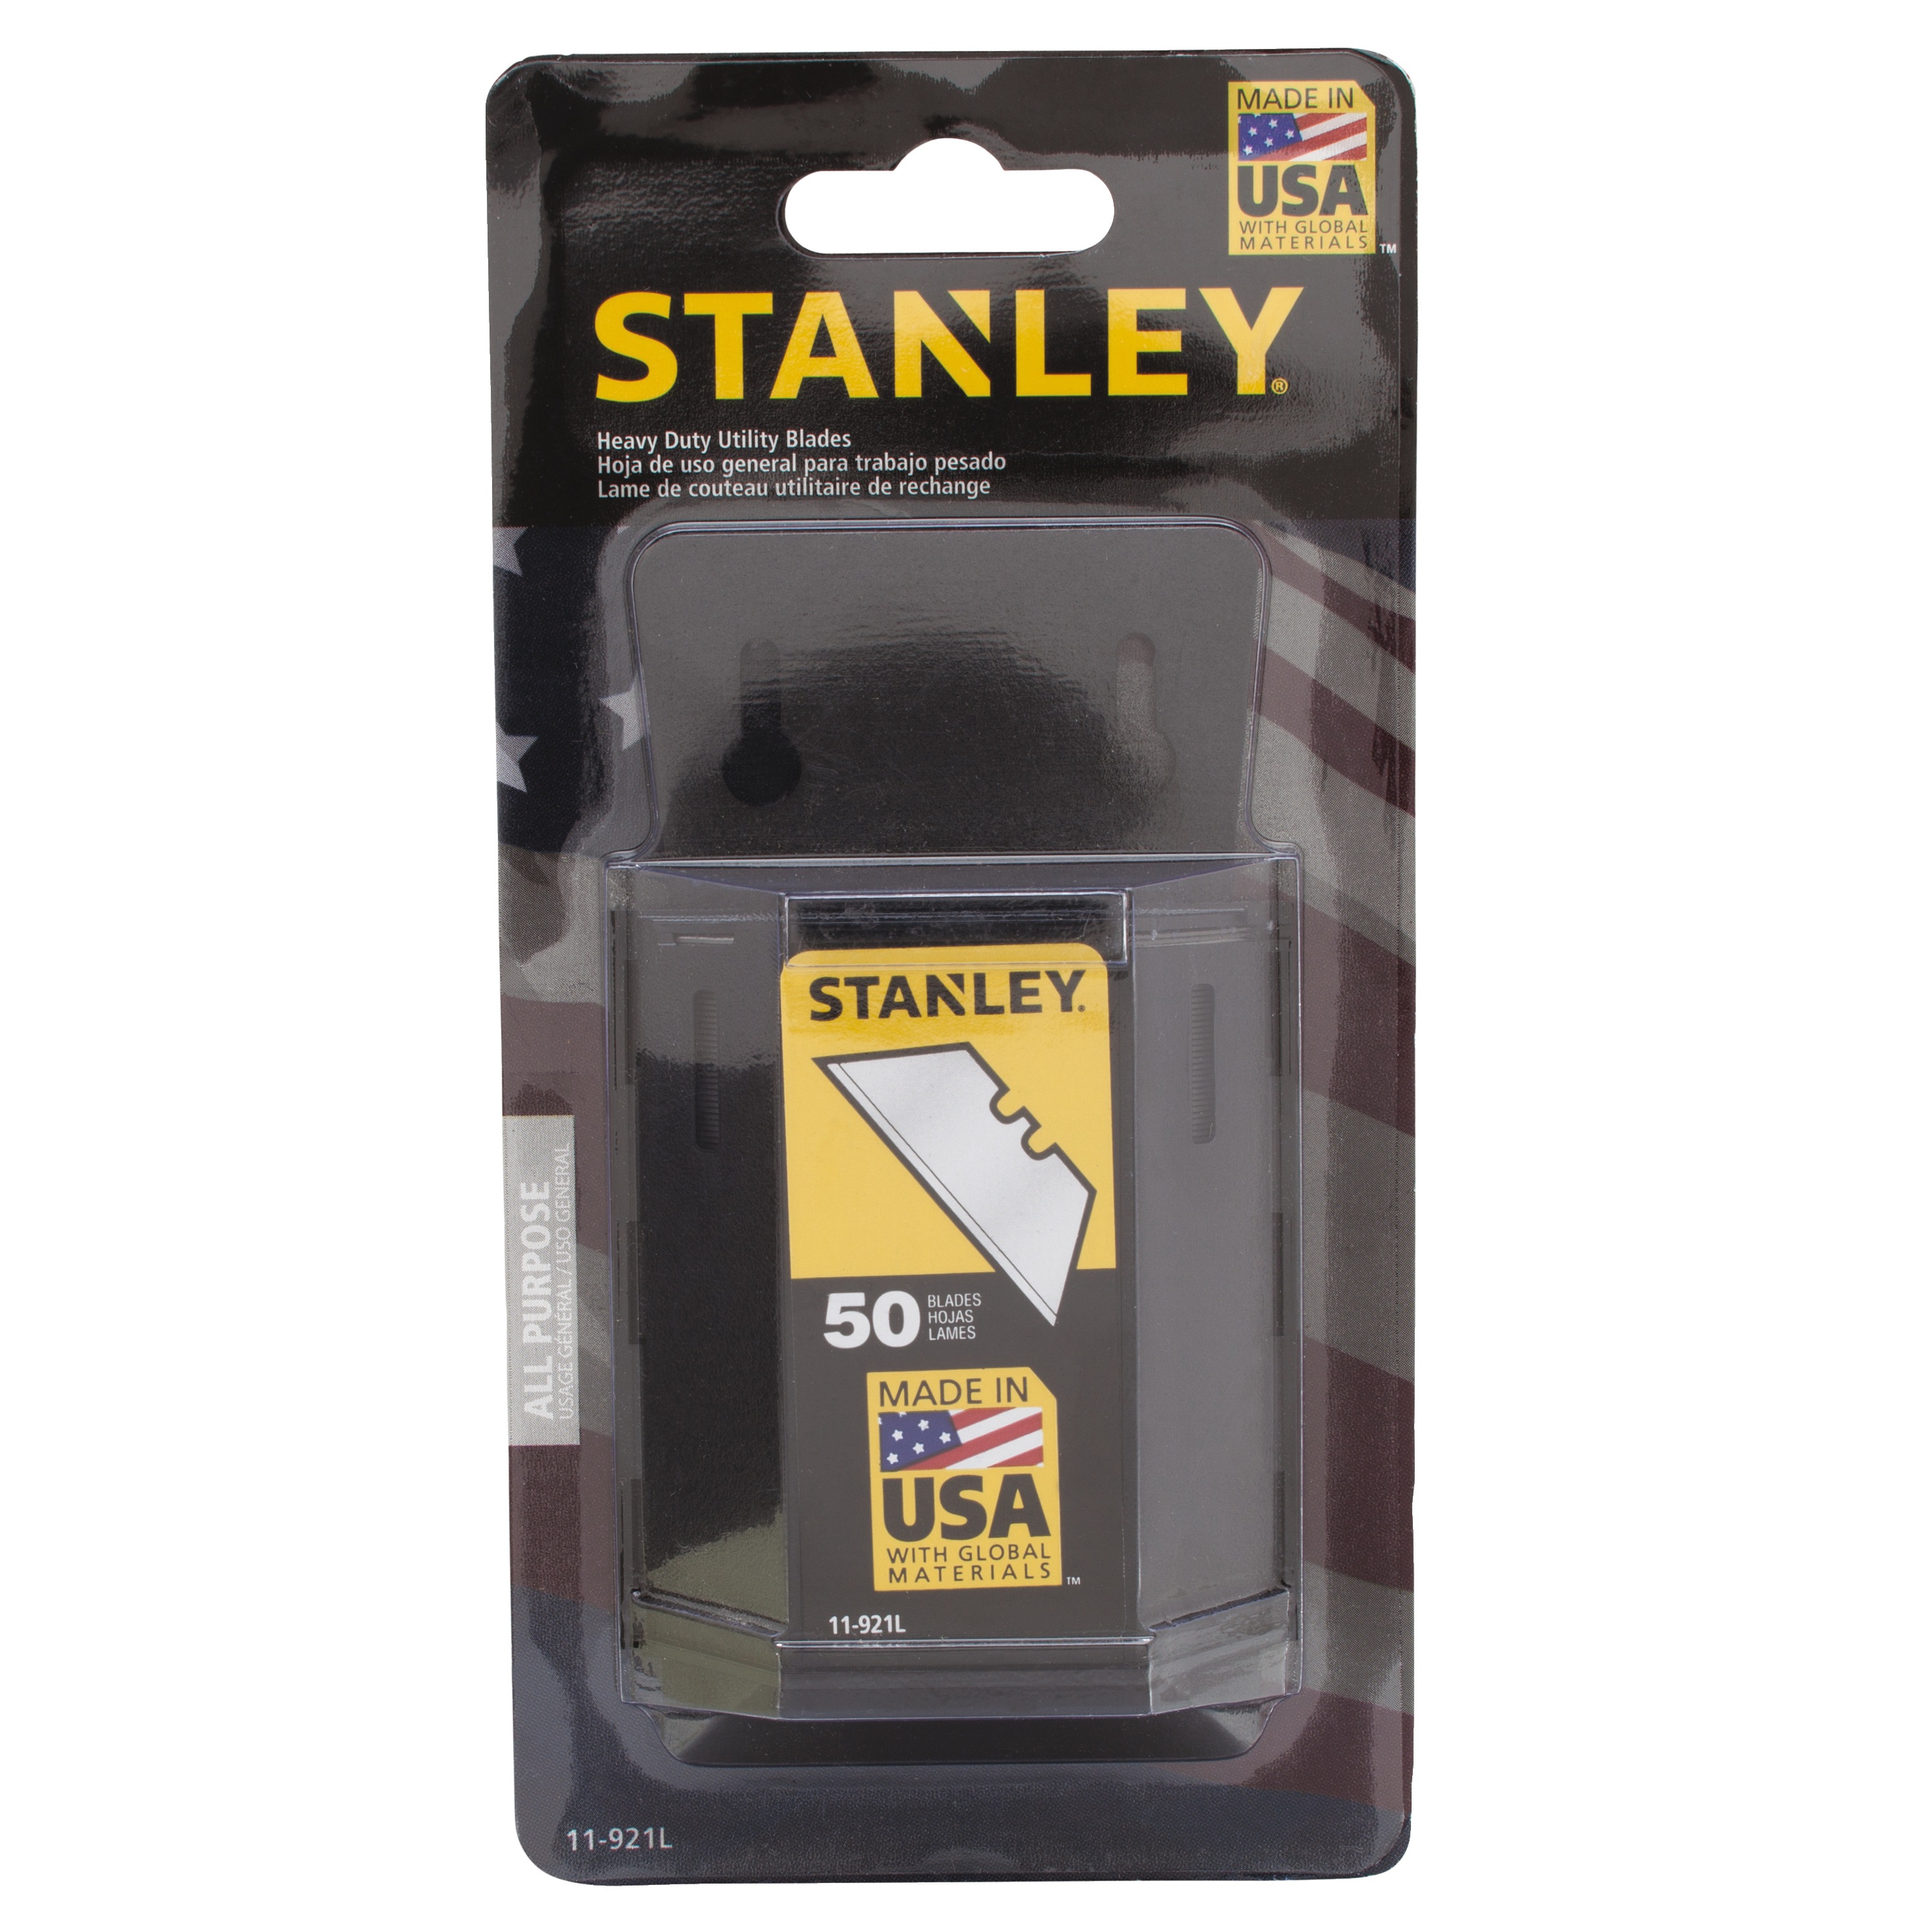 Stanley Tools - HeavyDuty Steel Blades with Dispenser 50 PK - 11-921L